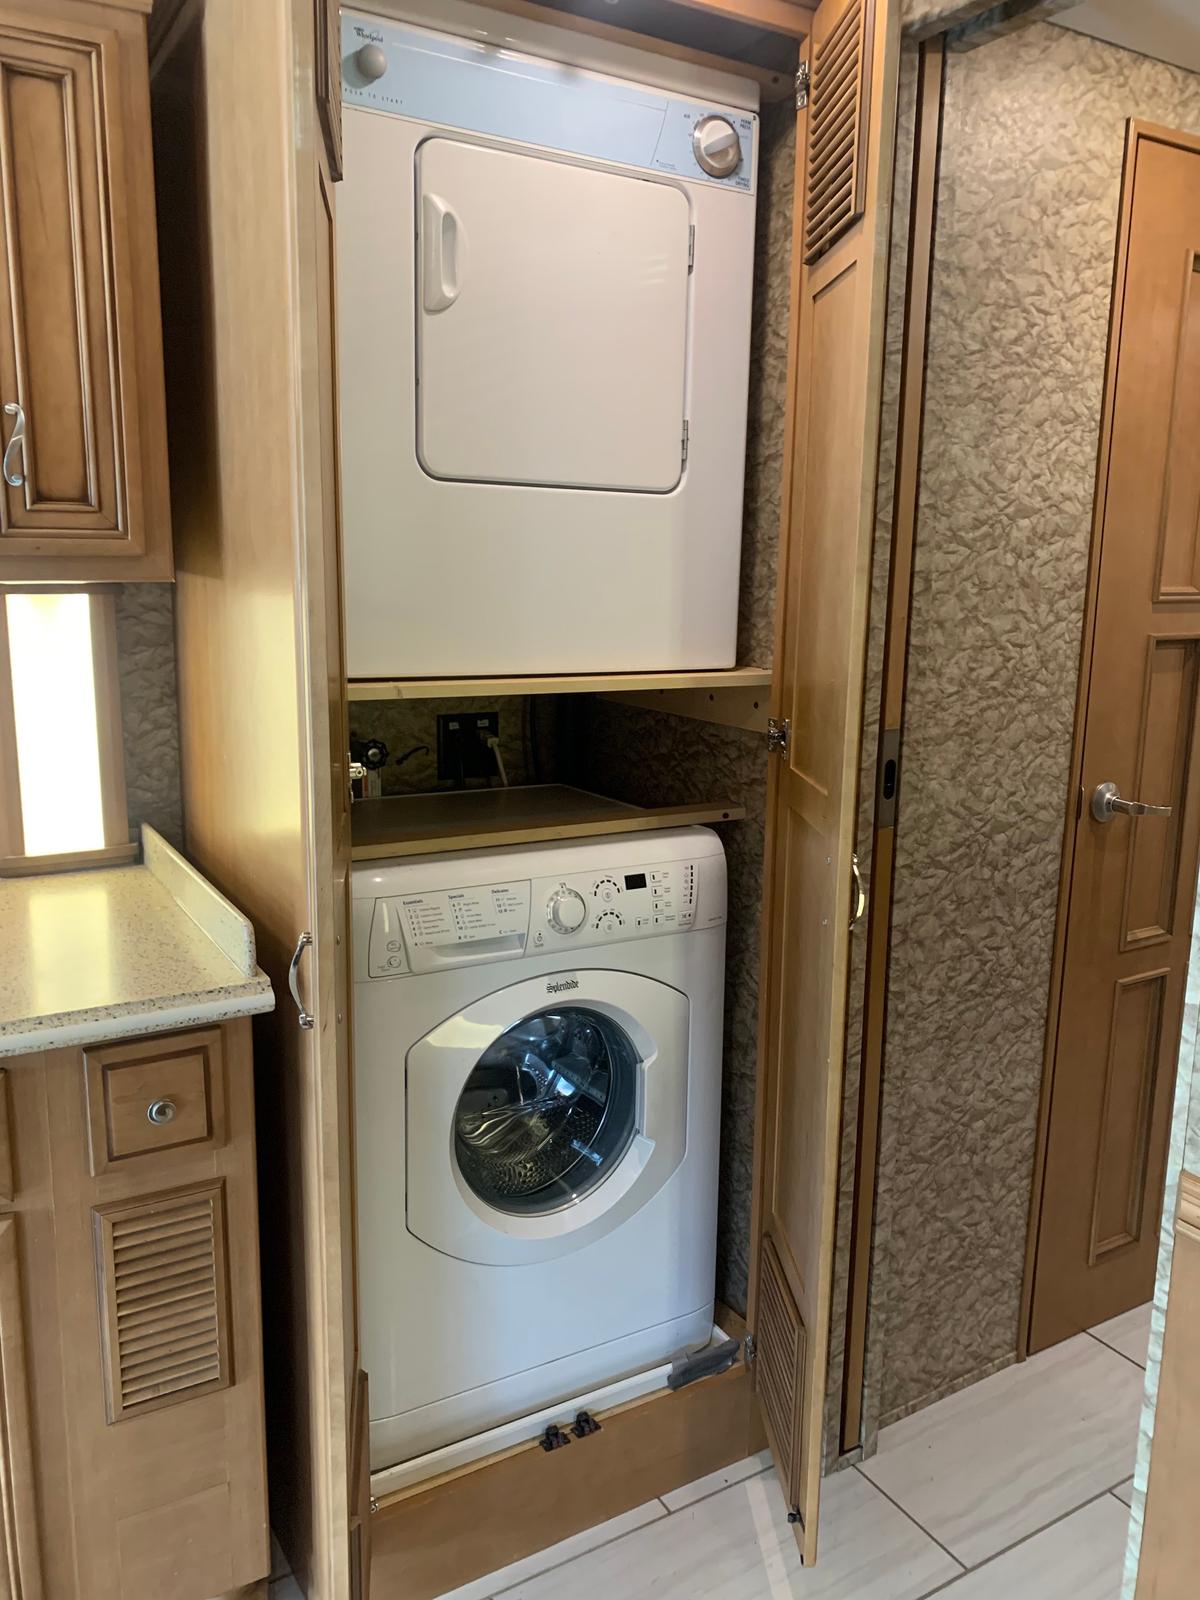 Most luxury motor homes have washers and dryers, like this pair in a coach for sale at Lazy Days RV in Seffner, Fla. (Susan Taylor Martin/Tampa Bay Times/TNS)